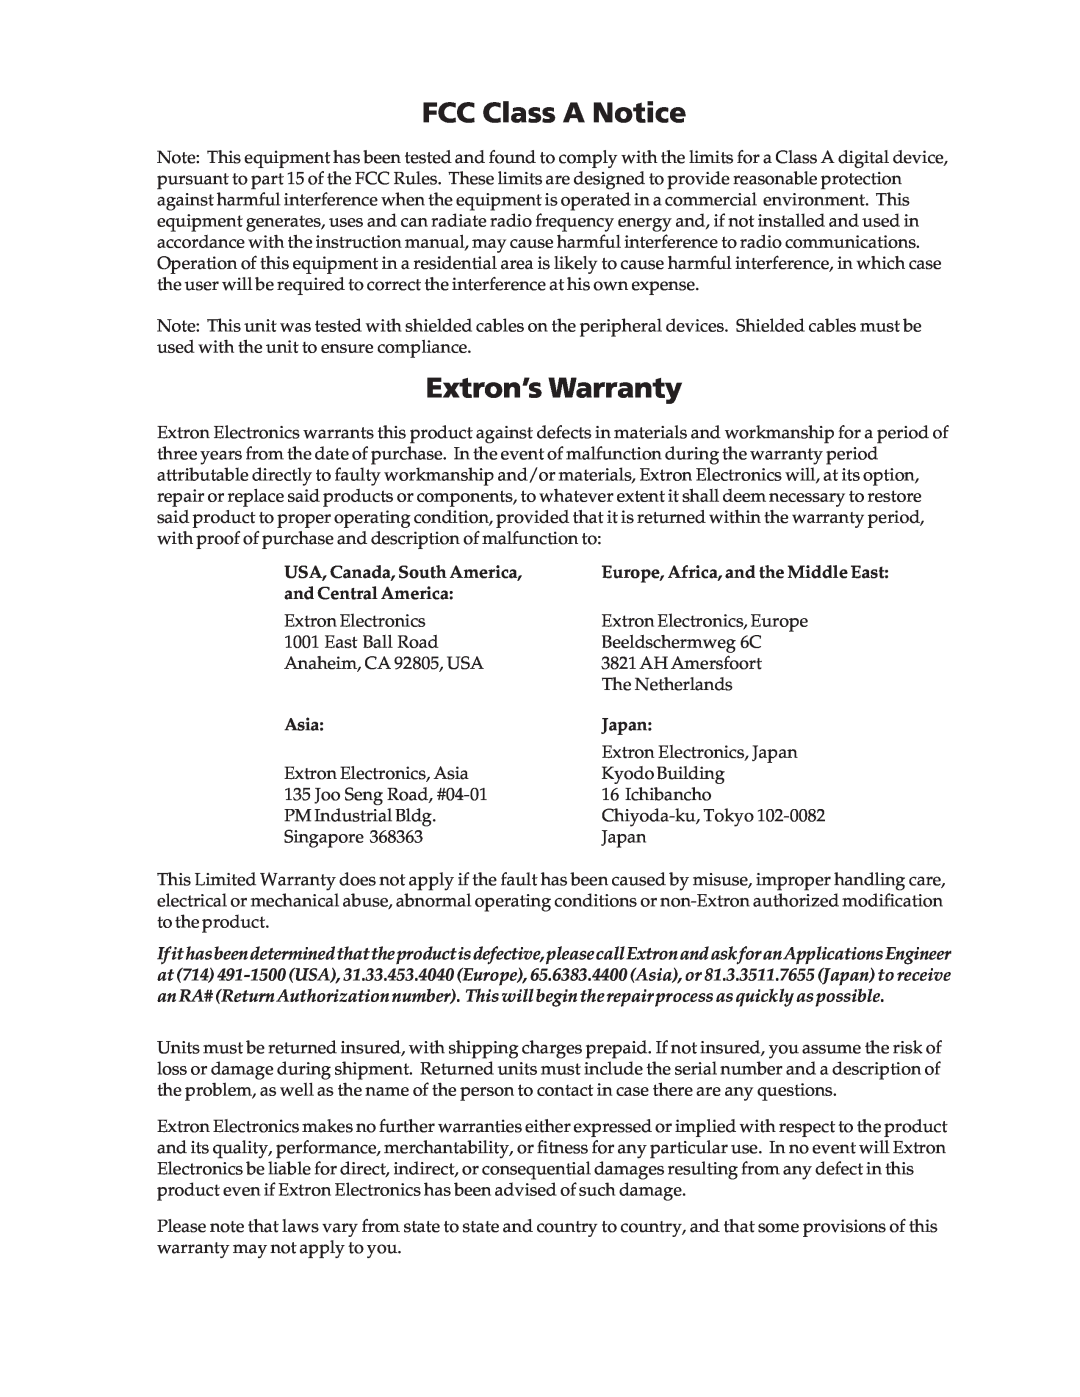 Extron electronic SGS 408 FCC Class A Notice, Extron’s Warranty, USA, Canada, South America, and Central America, Asia 